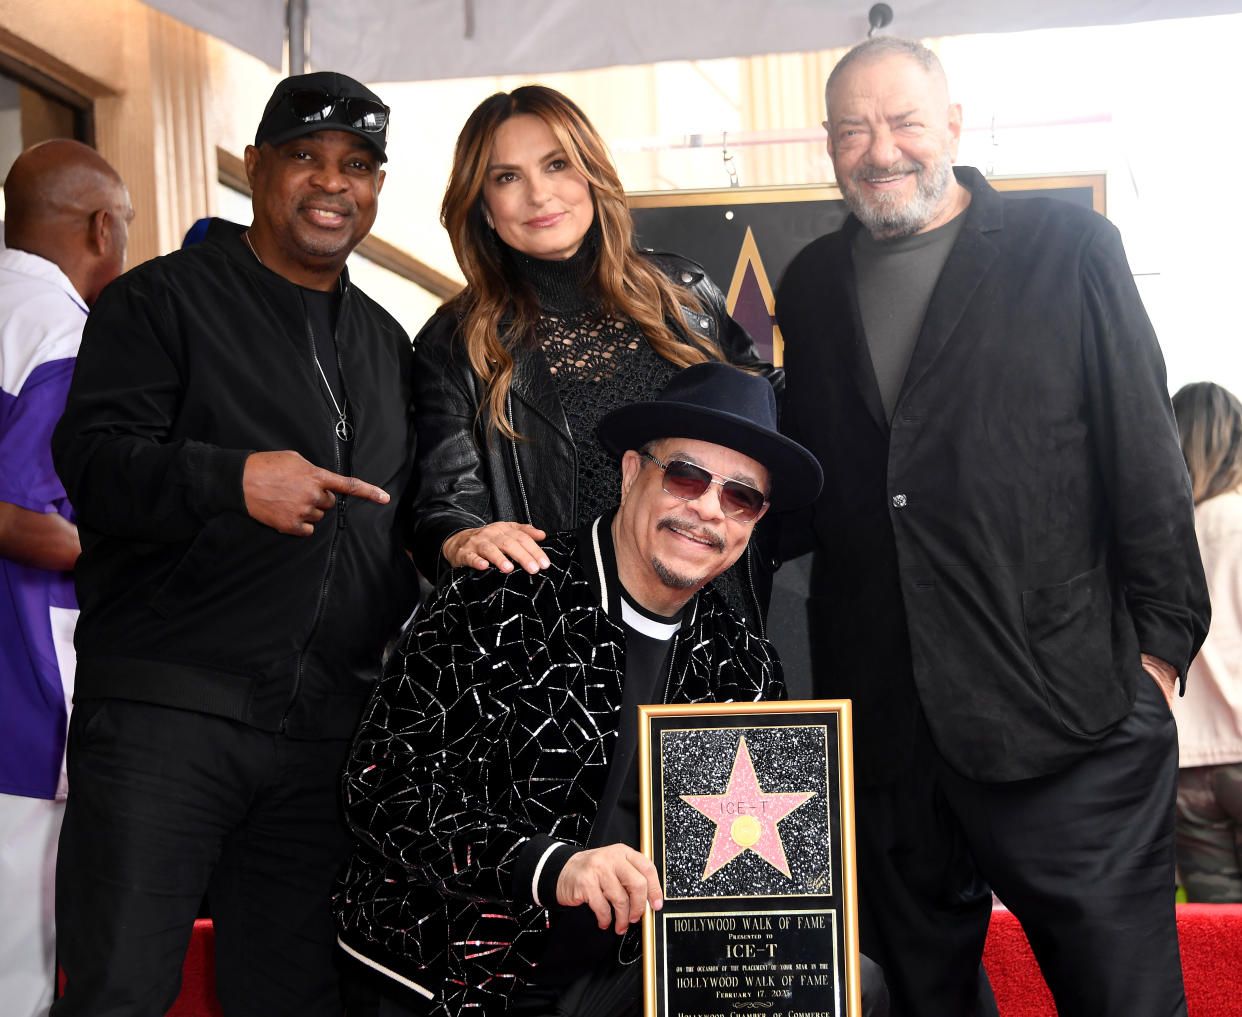 Ice-T is joined by Chuck D, Mariska Hargitay and Dick Wolf. (Photo: Albert L. Ortega/Getty Images)